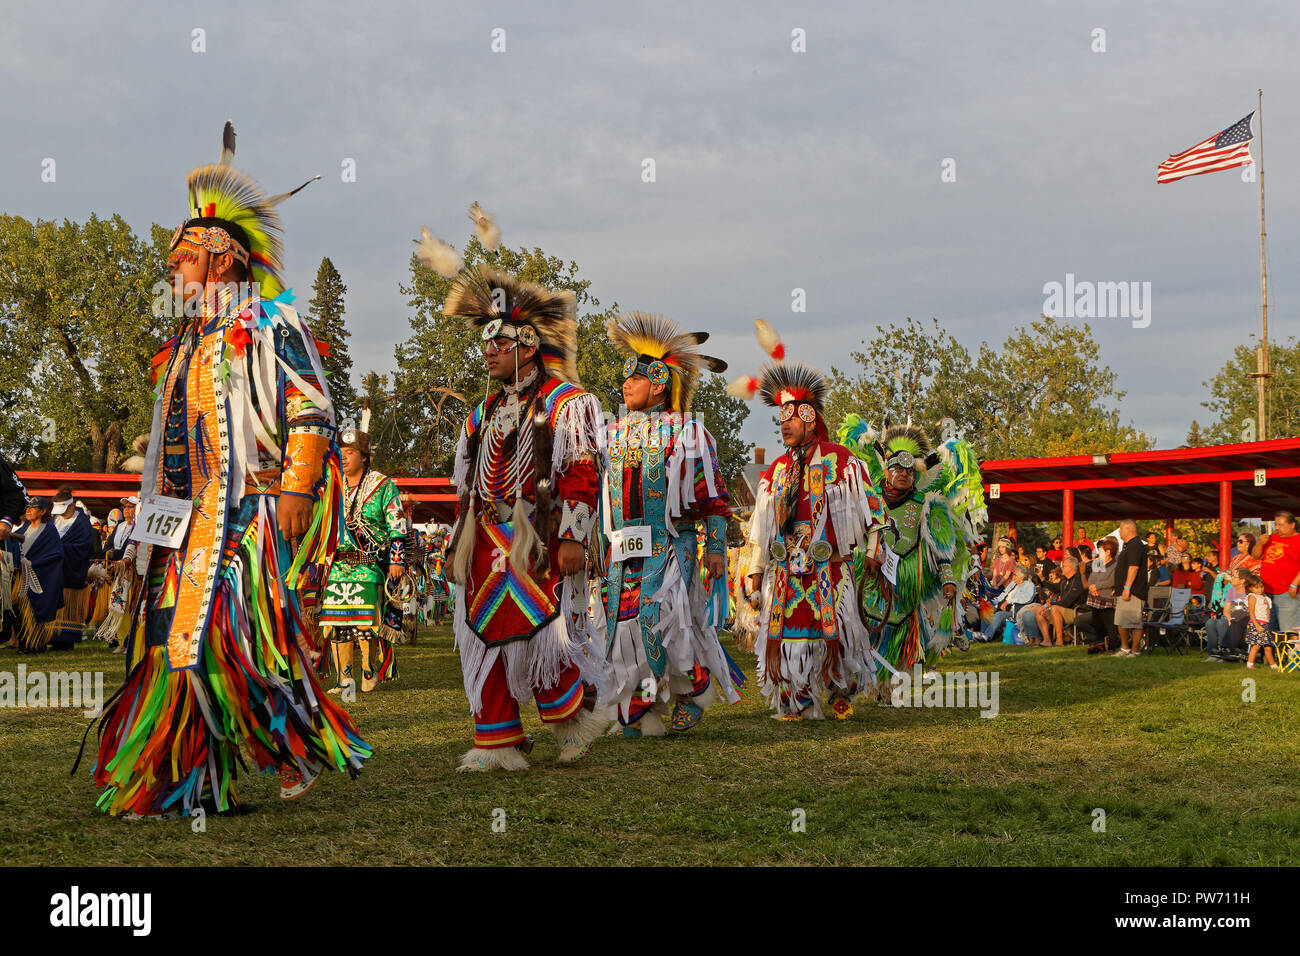 BISMARK, NORTH DAKOTA, September 8, 2018 : Grand Entry of the 49th annual United Tribes Pow Wow, one large outdoor event that gathers more than 900 da Stock Photo